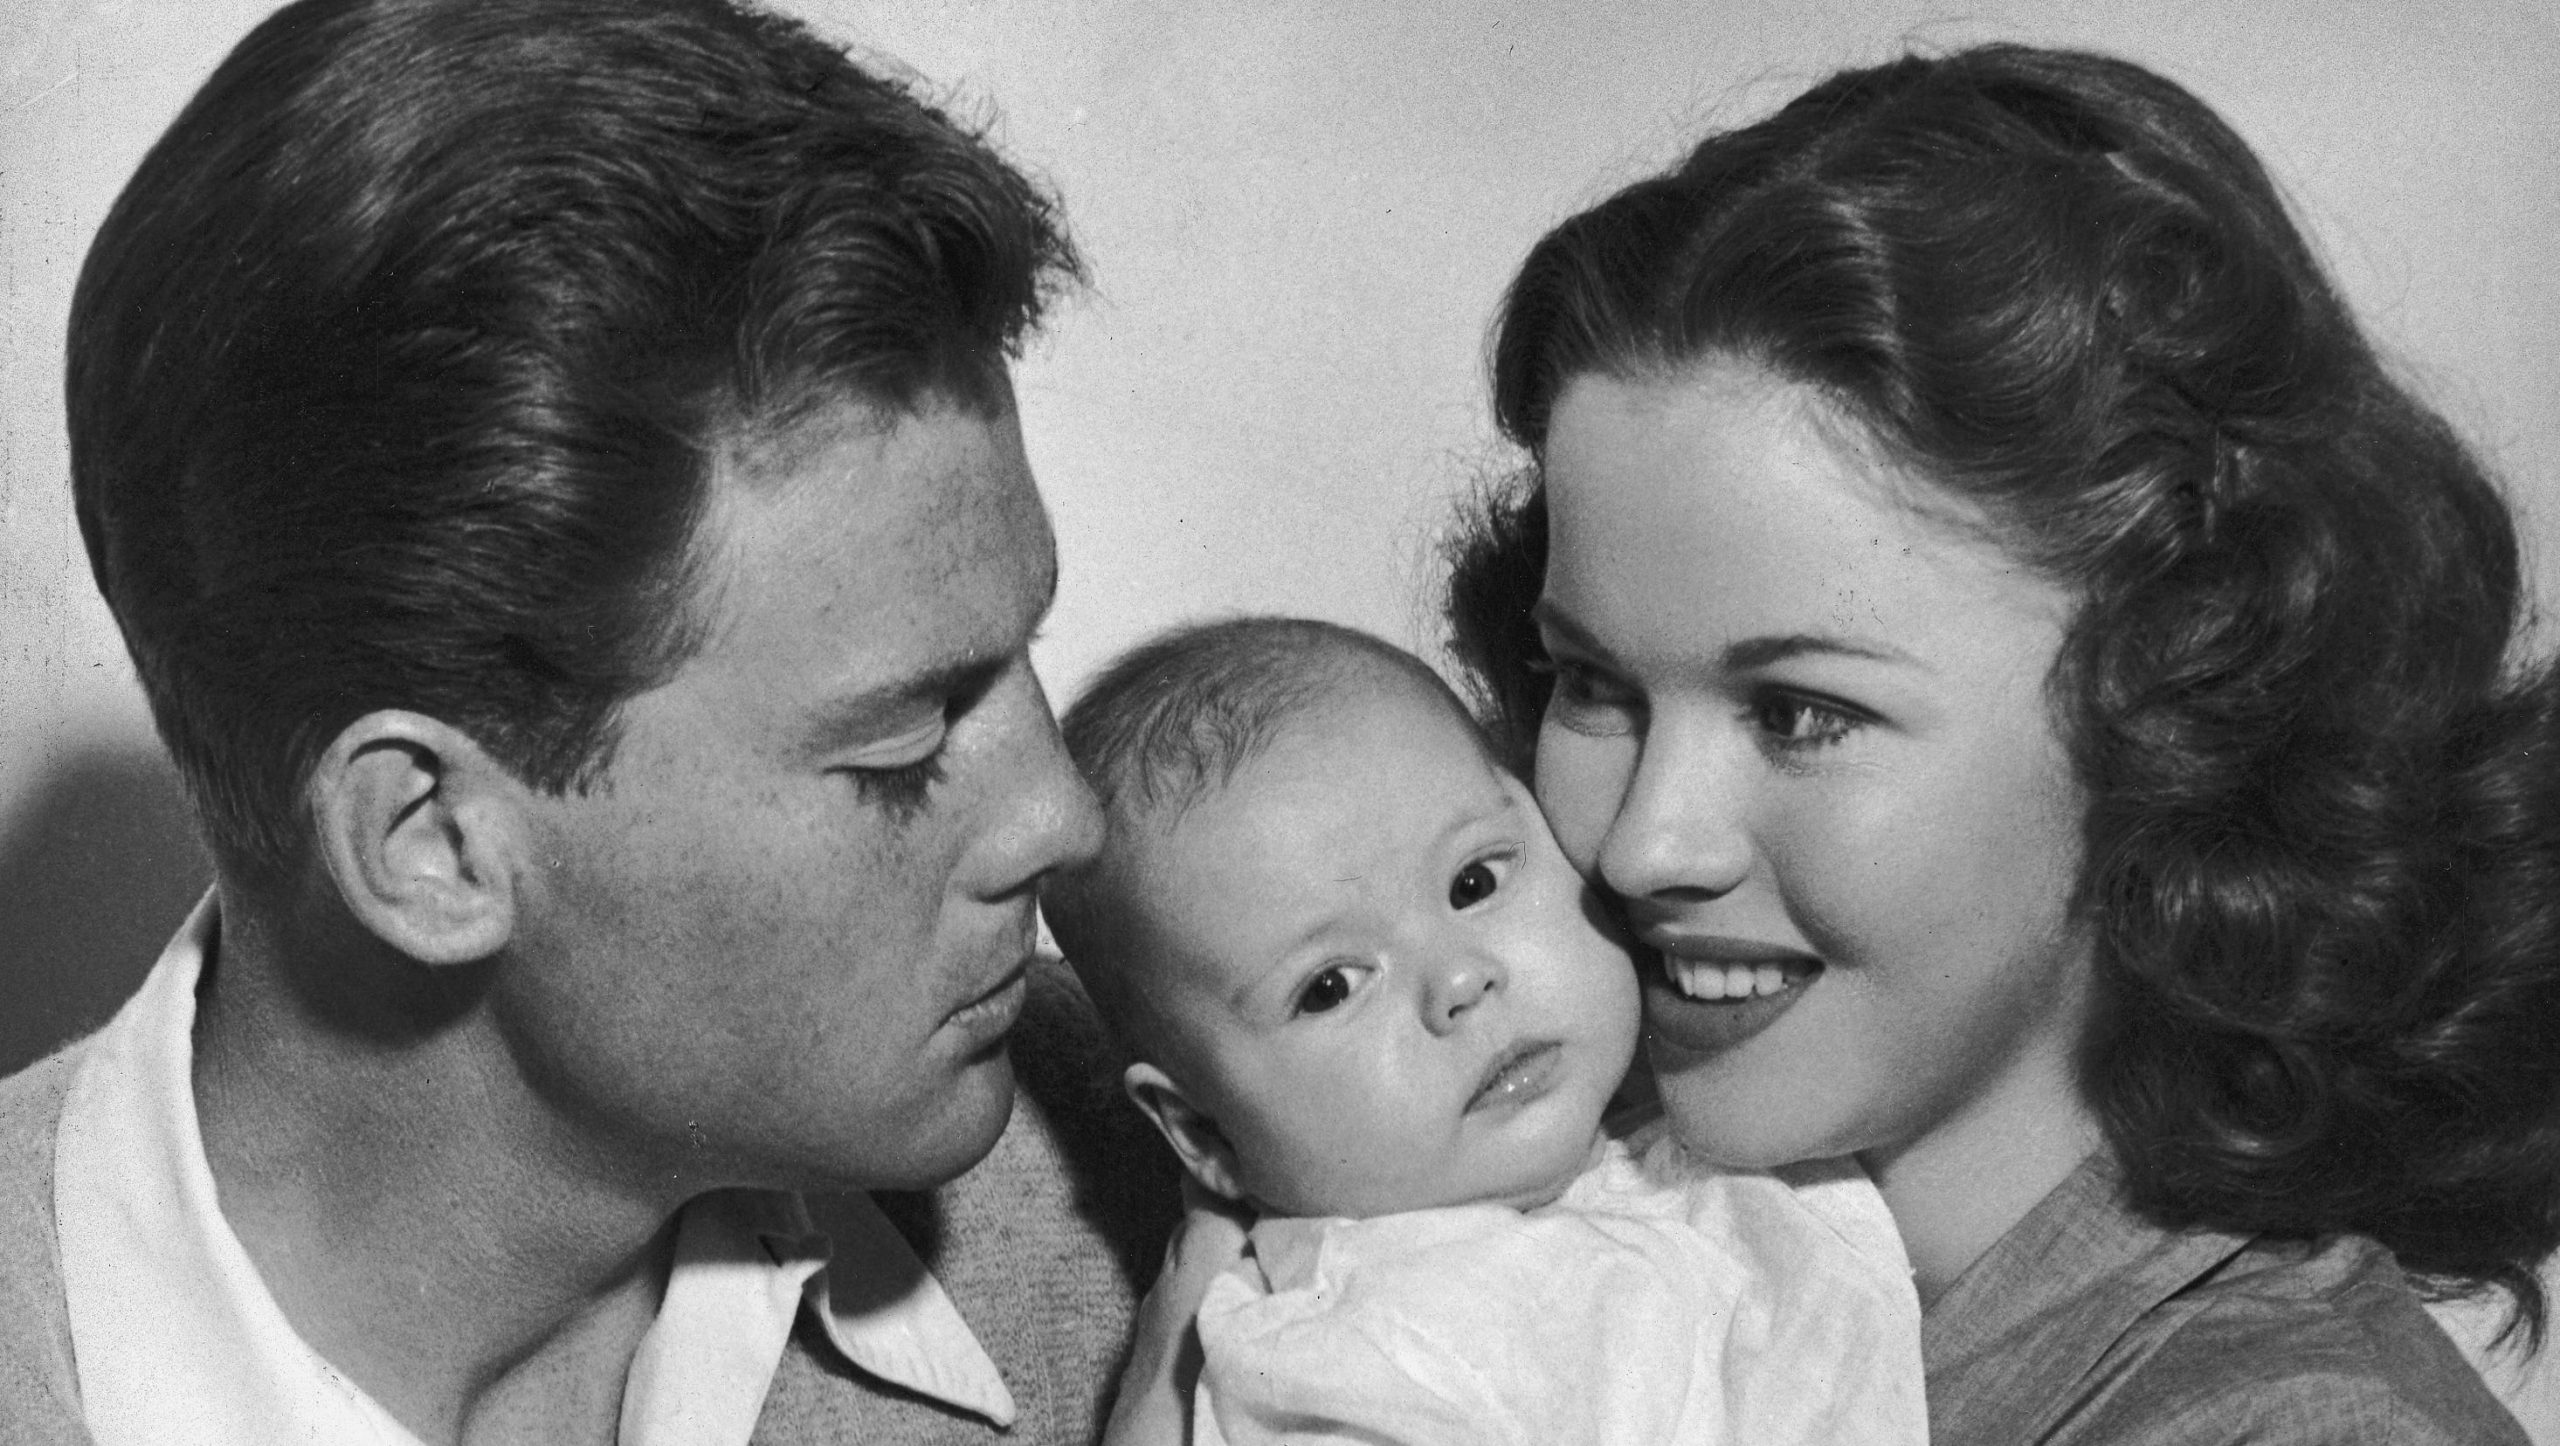 shirley temple and her personal life